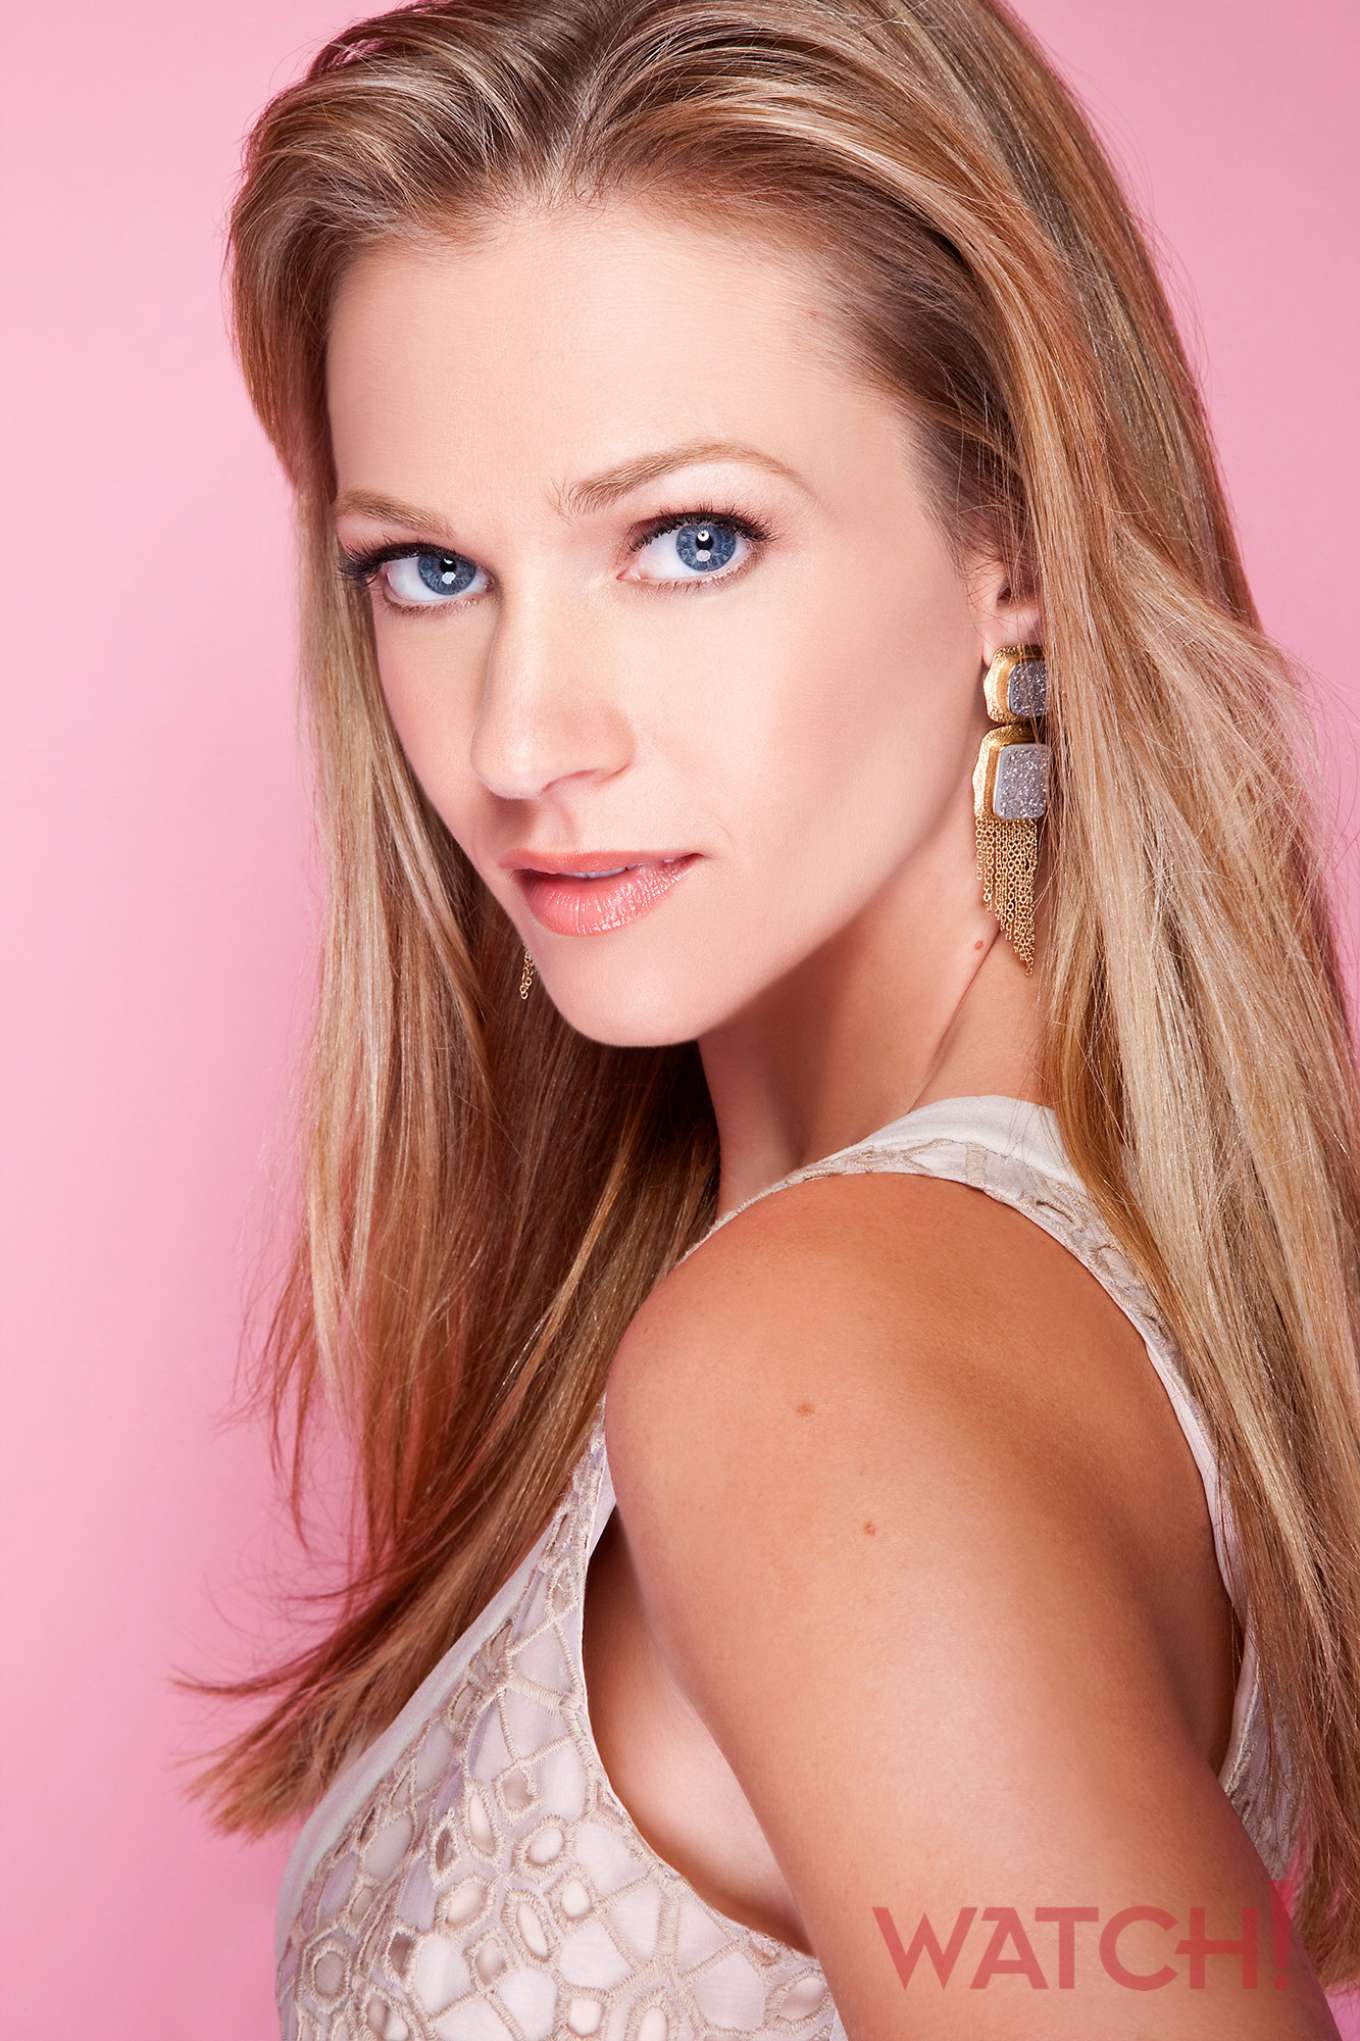 A.J. Cook For Watch Magazine 2018                 A.J.-Cook-for-Watch-Magazine-2018--01